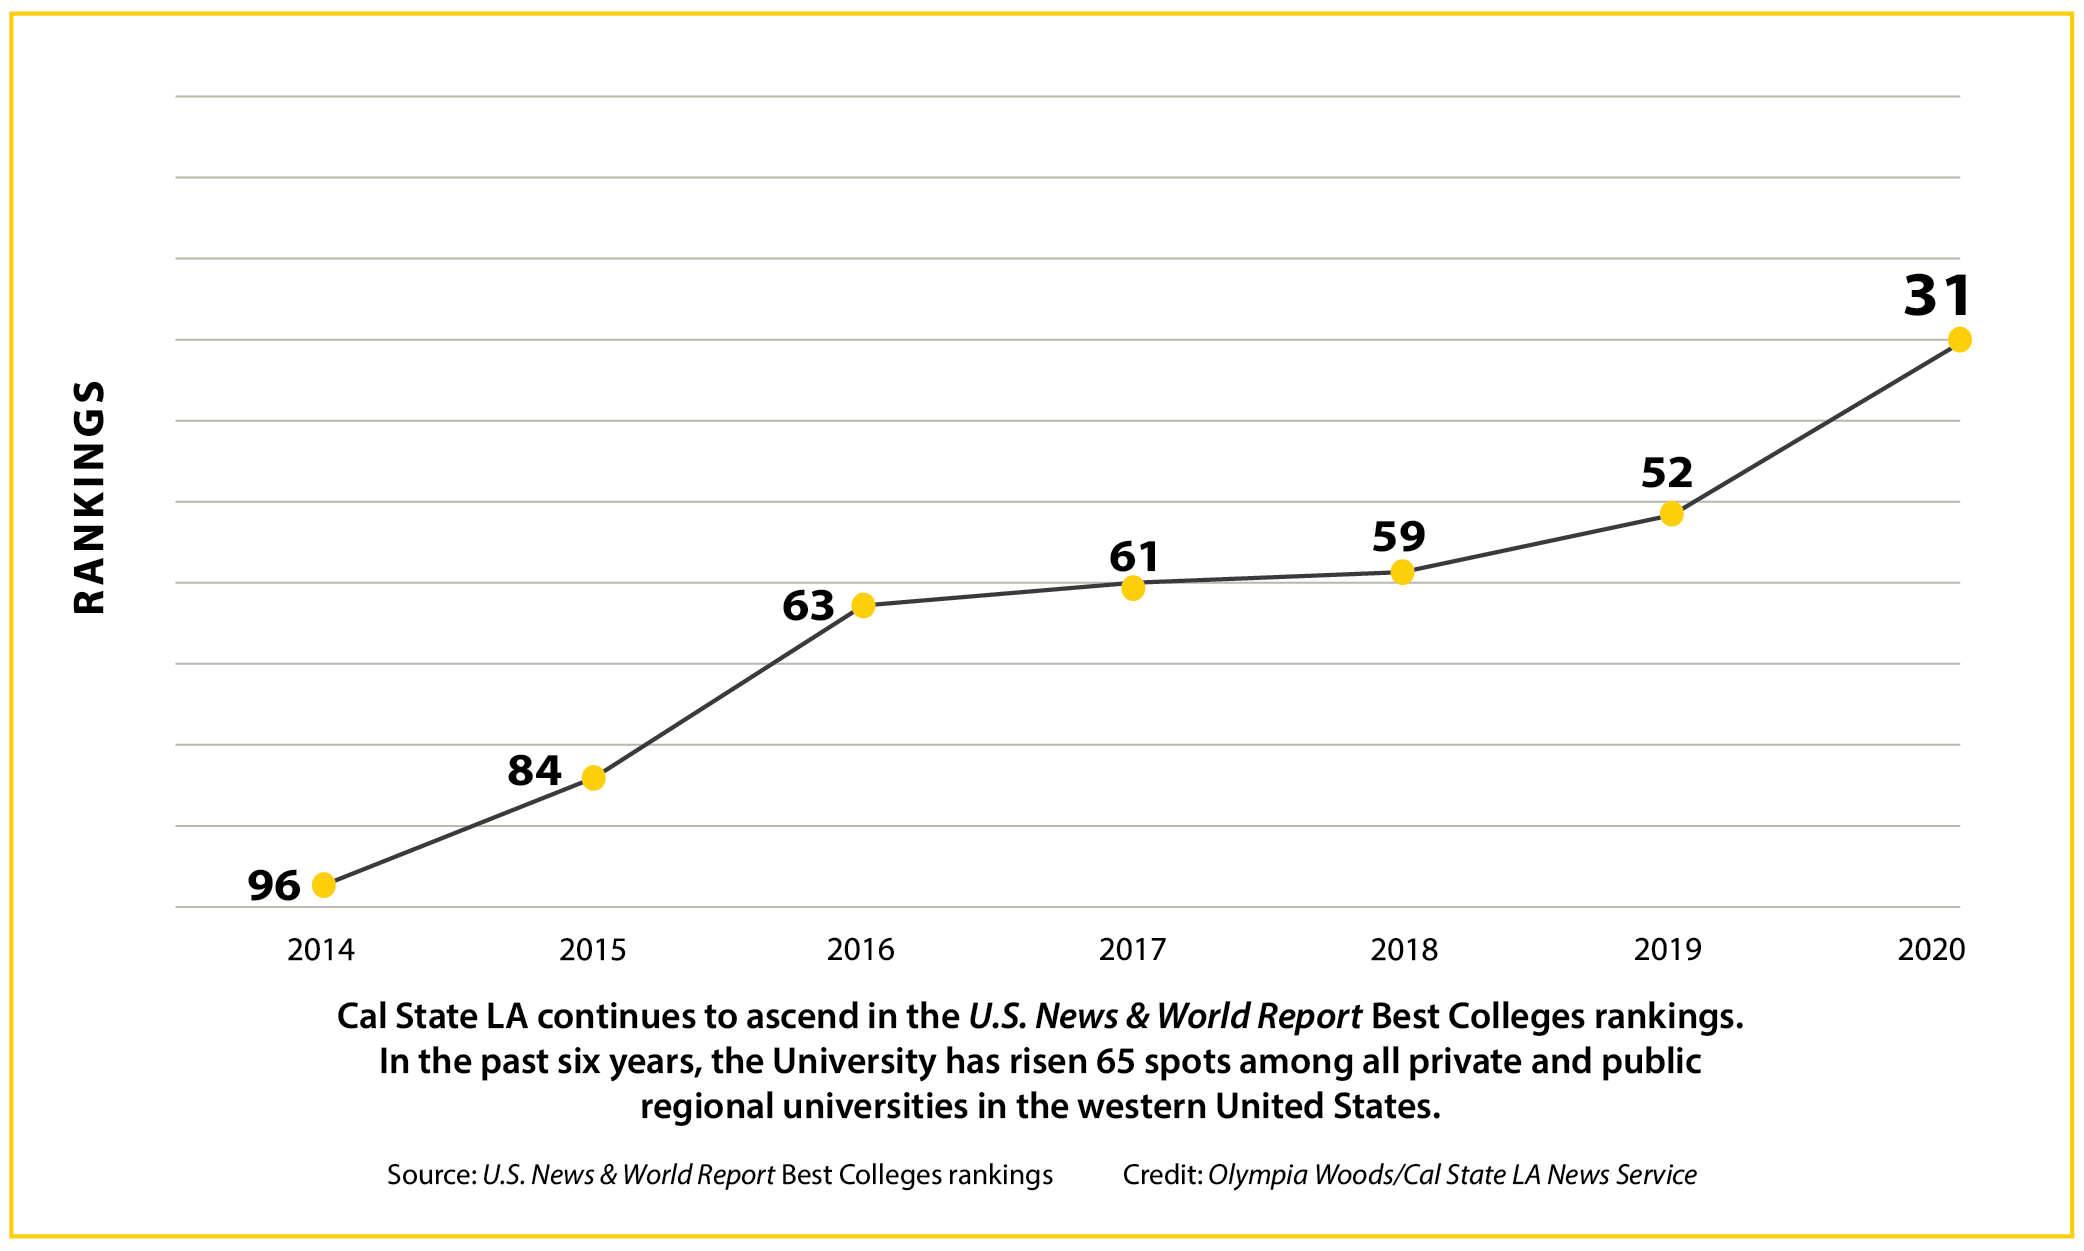 Line graph tracking Cal State LA's rise in the U.S. News rankings over the past six years.